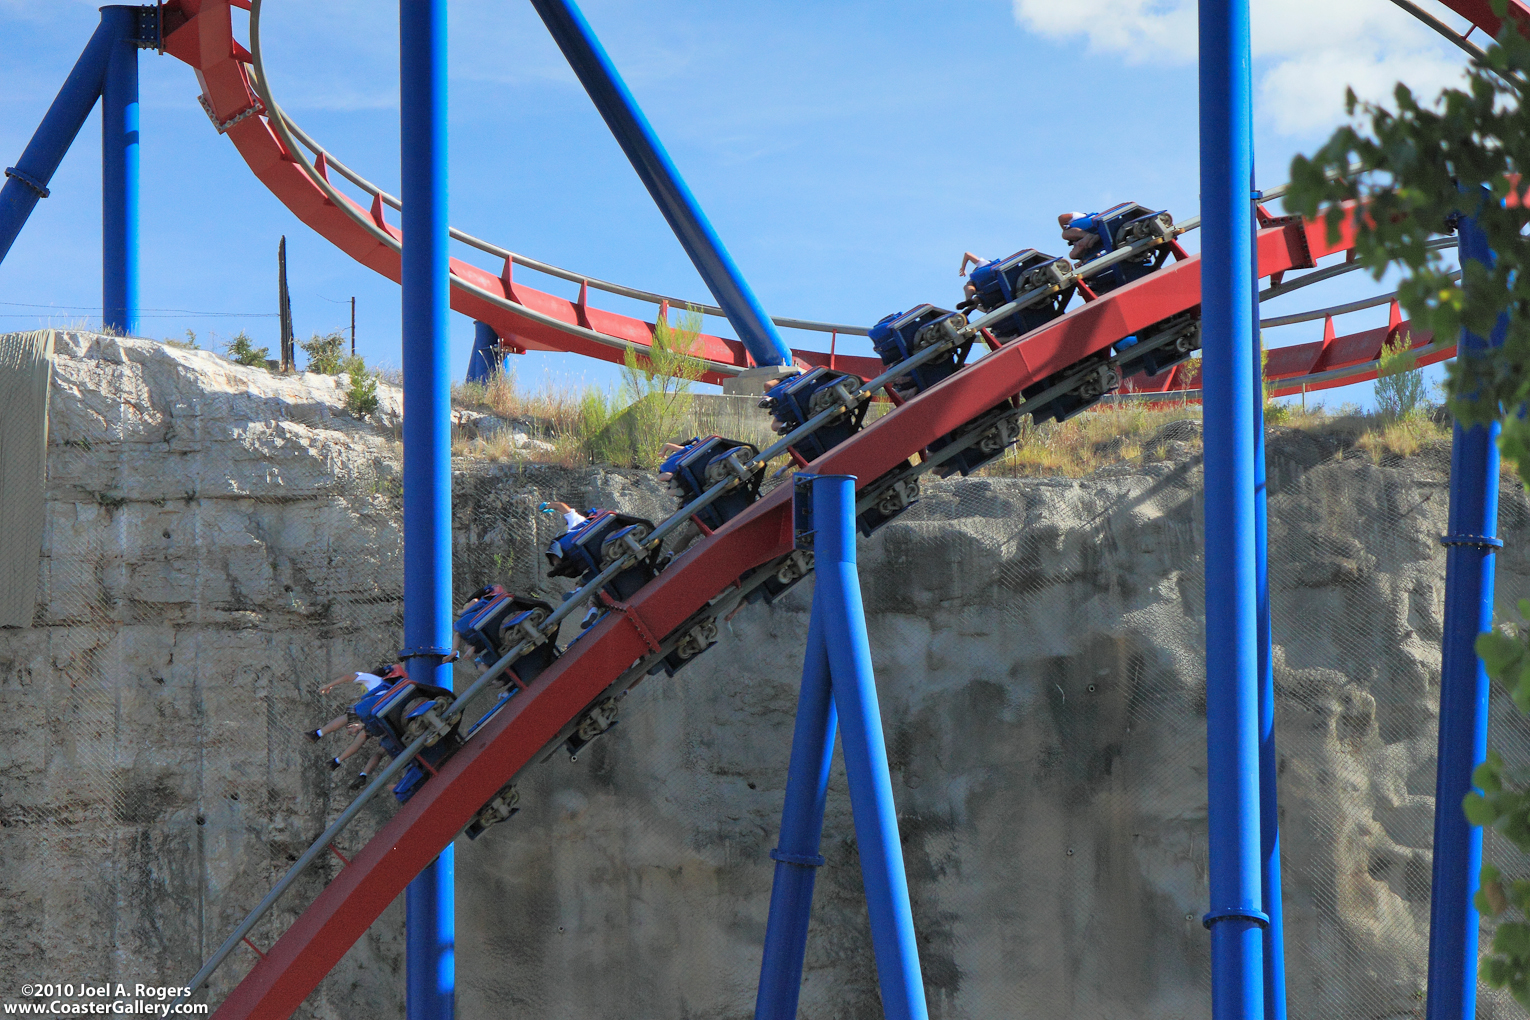 A roller coaster going over a cliff